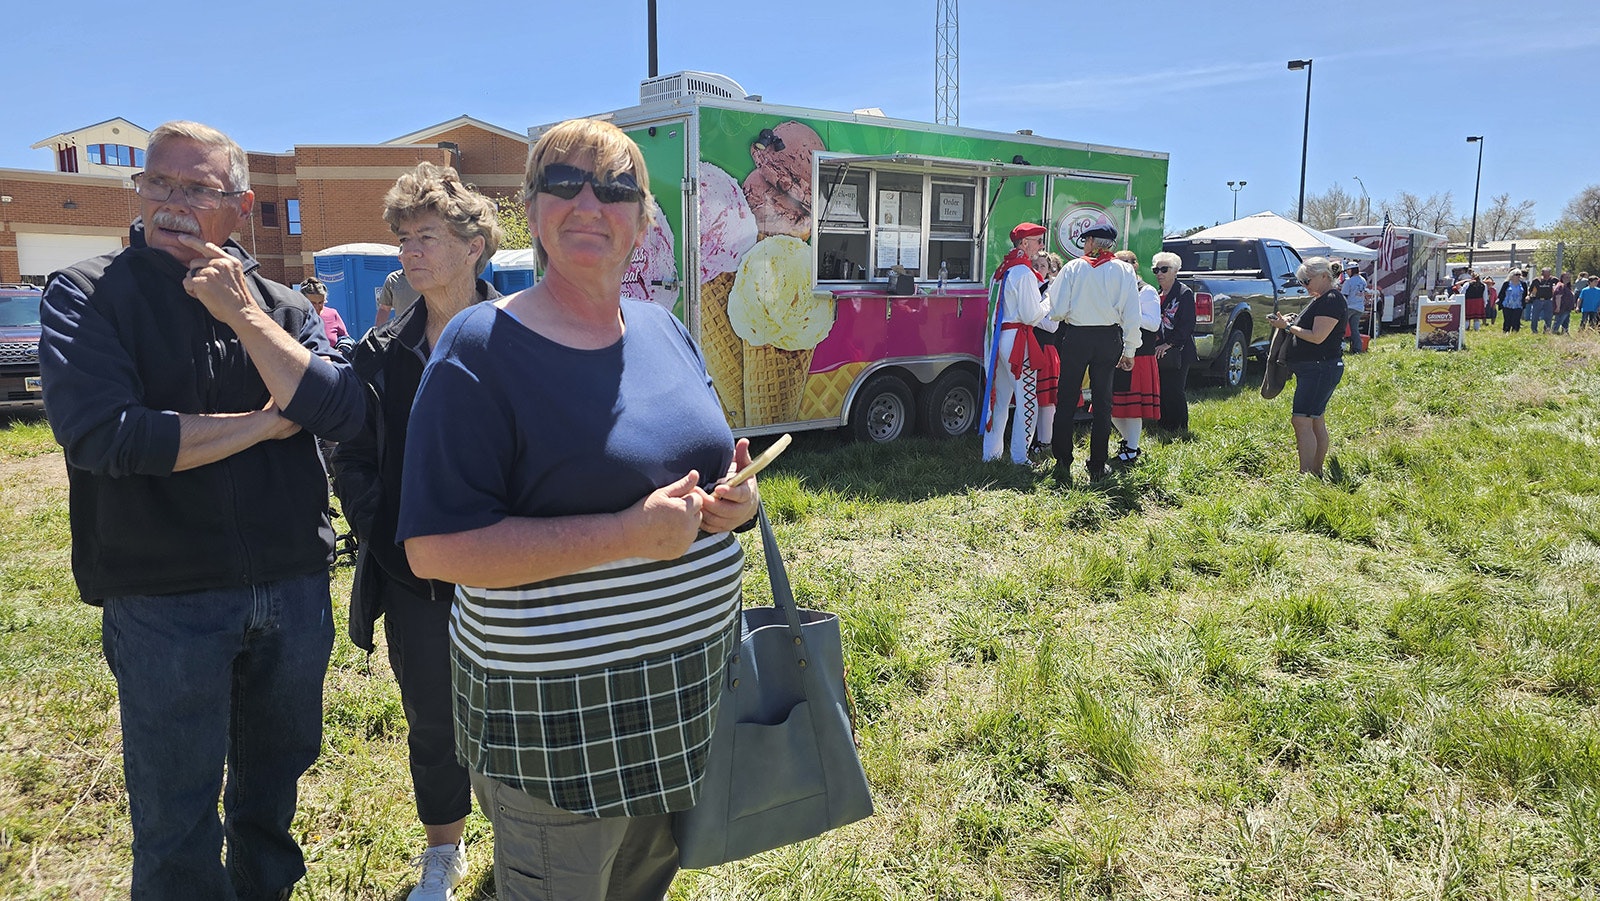 Terri Shugars waits in line to order some Basque sausages for lunch after spotting Gillette's sheepwagon festival from afar. In the background, a pair of Basque dancers are among those waiting in line for ice cream or sorbet from one of the food trucks on site.